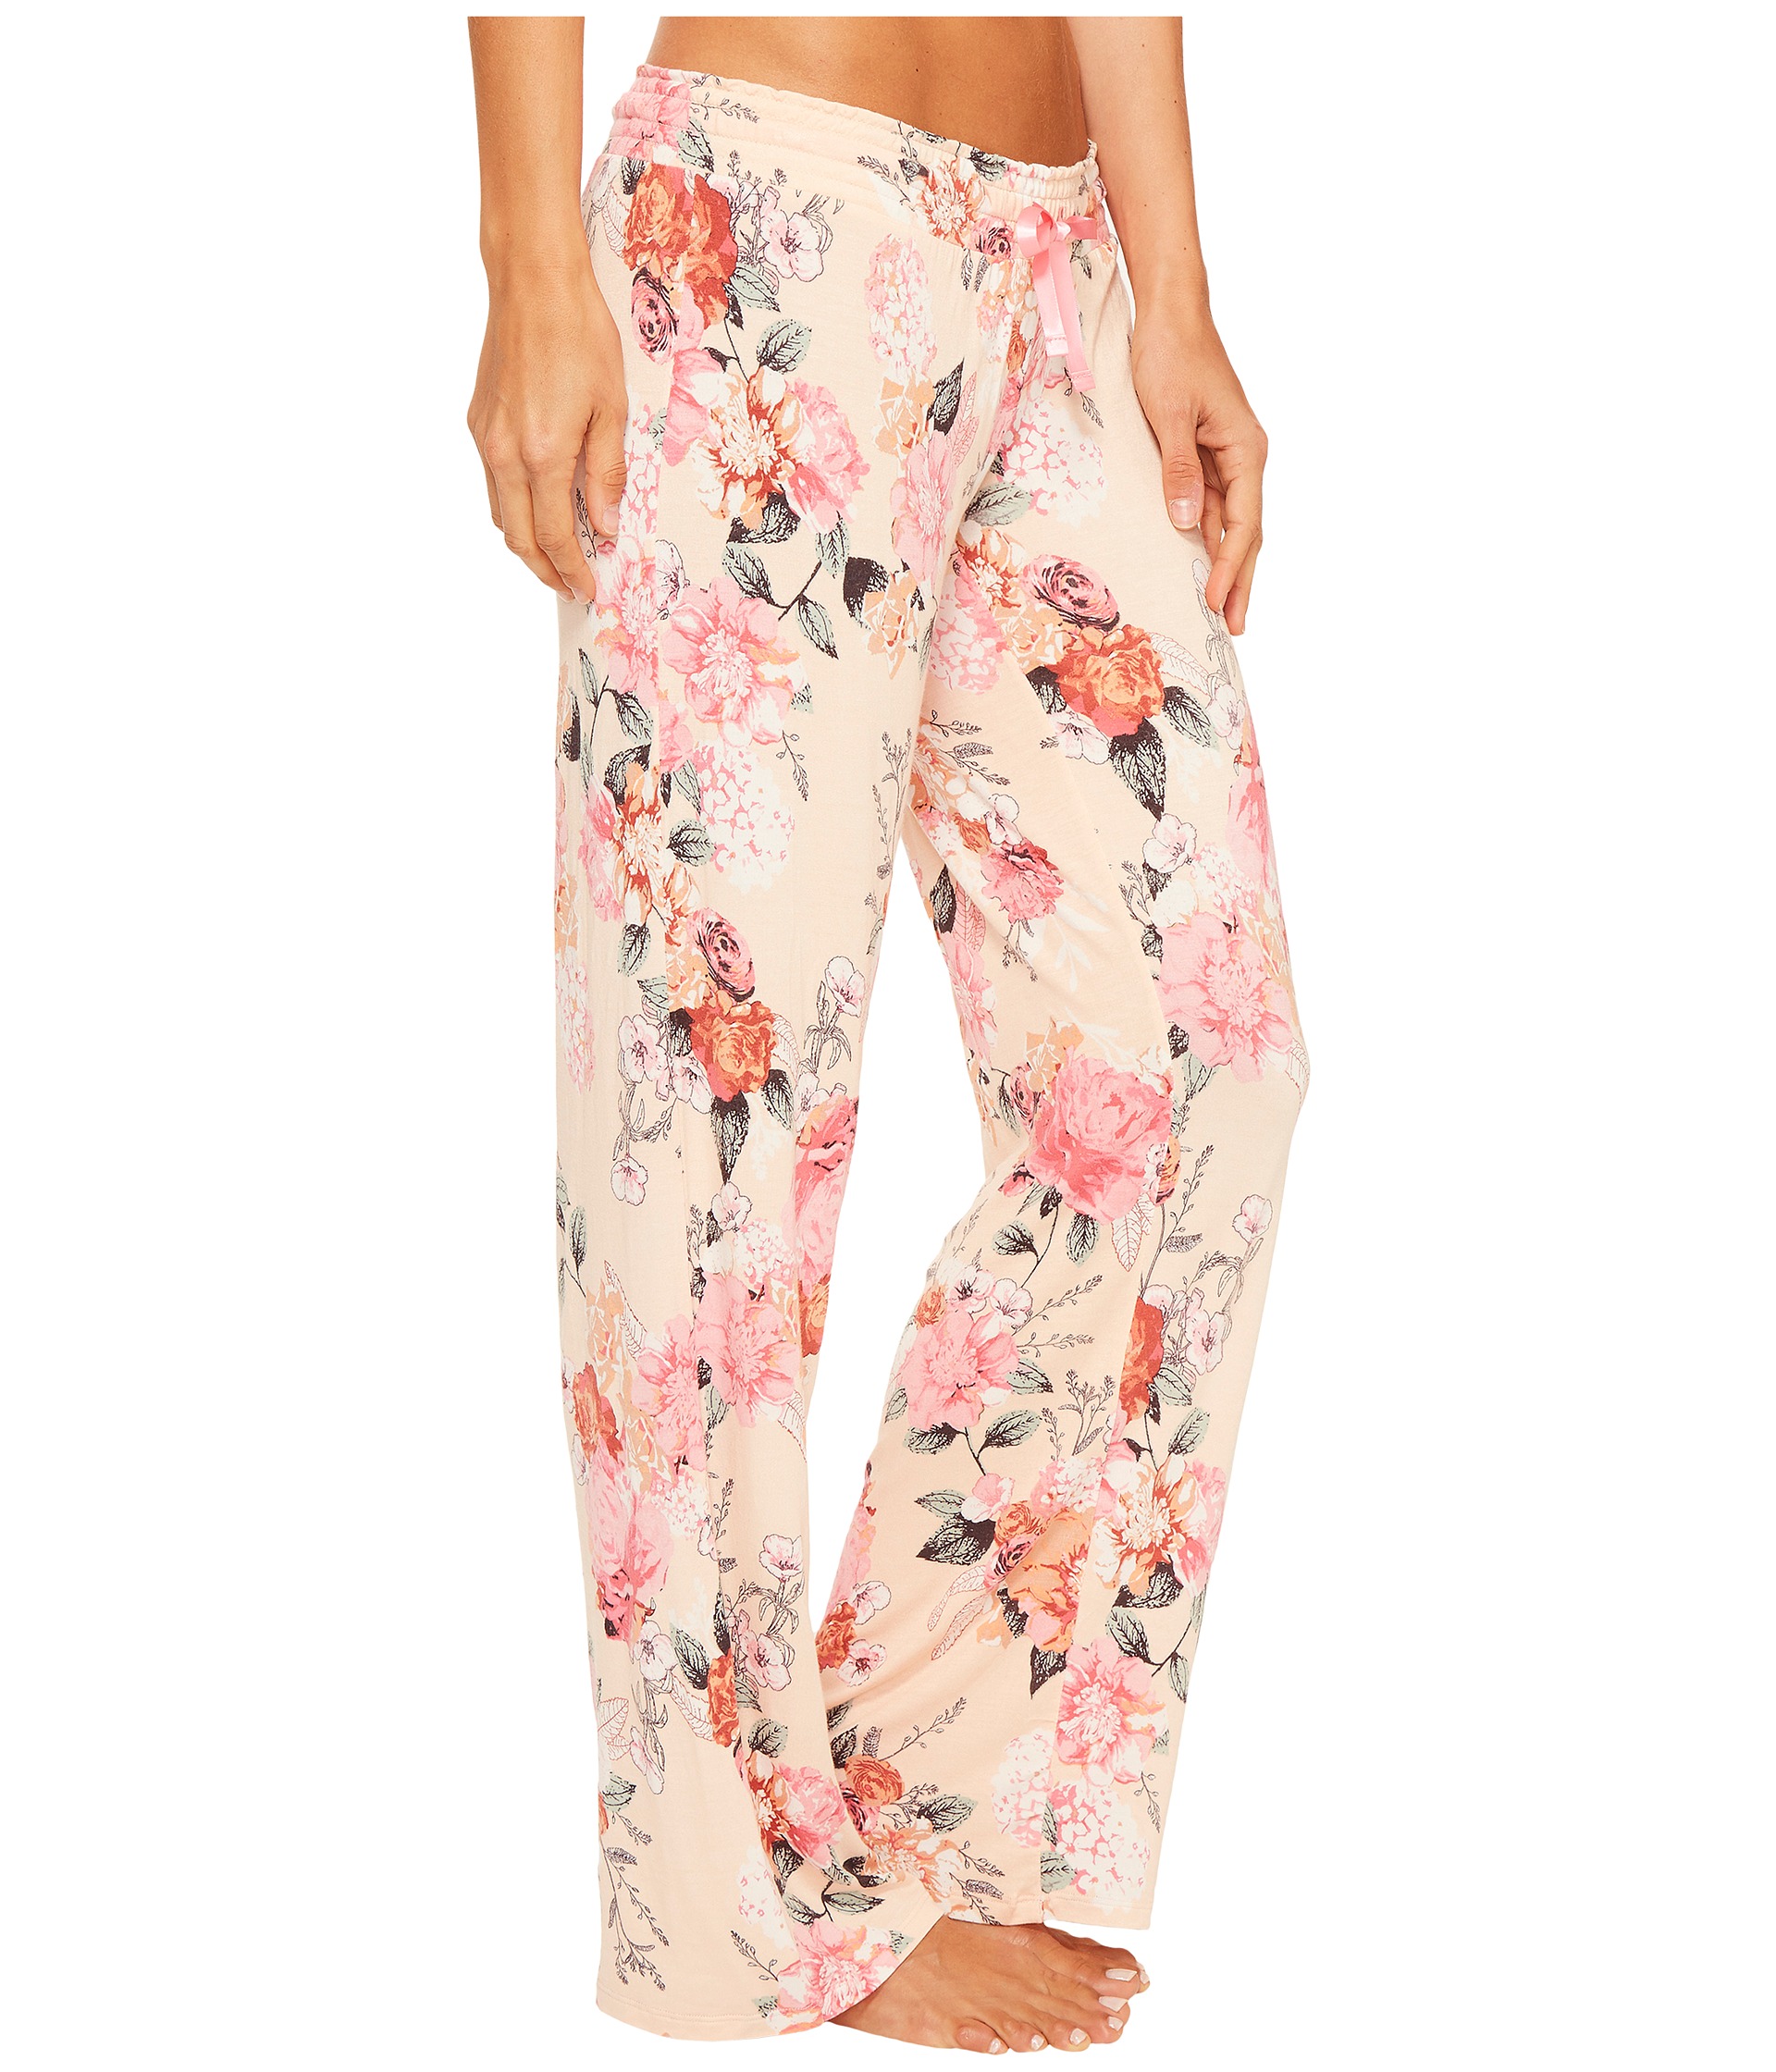 P.J. Salvage Rosy Outlook PJ Pants at Zappos.com